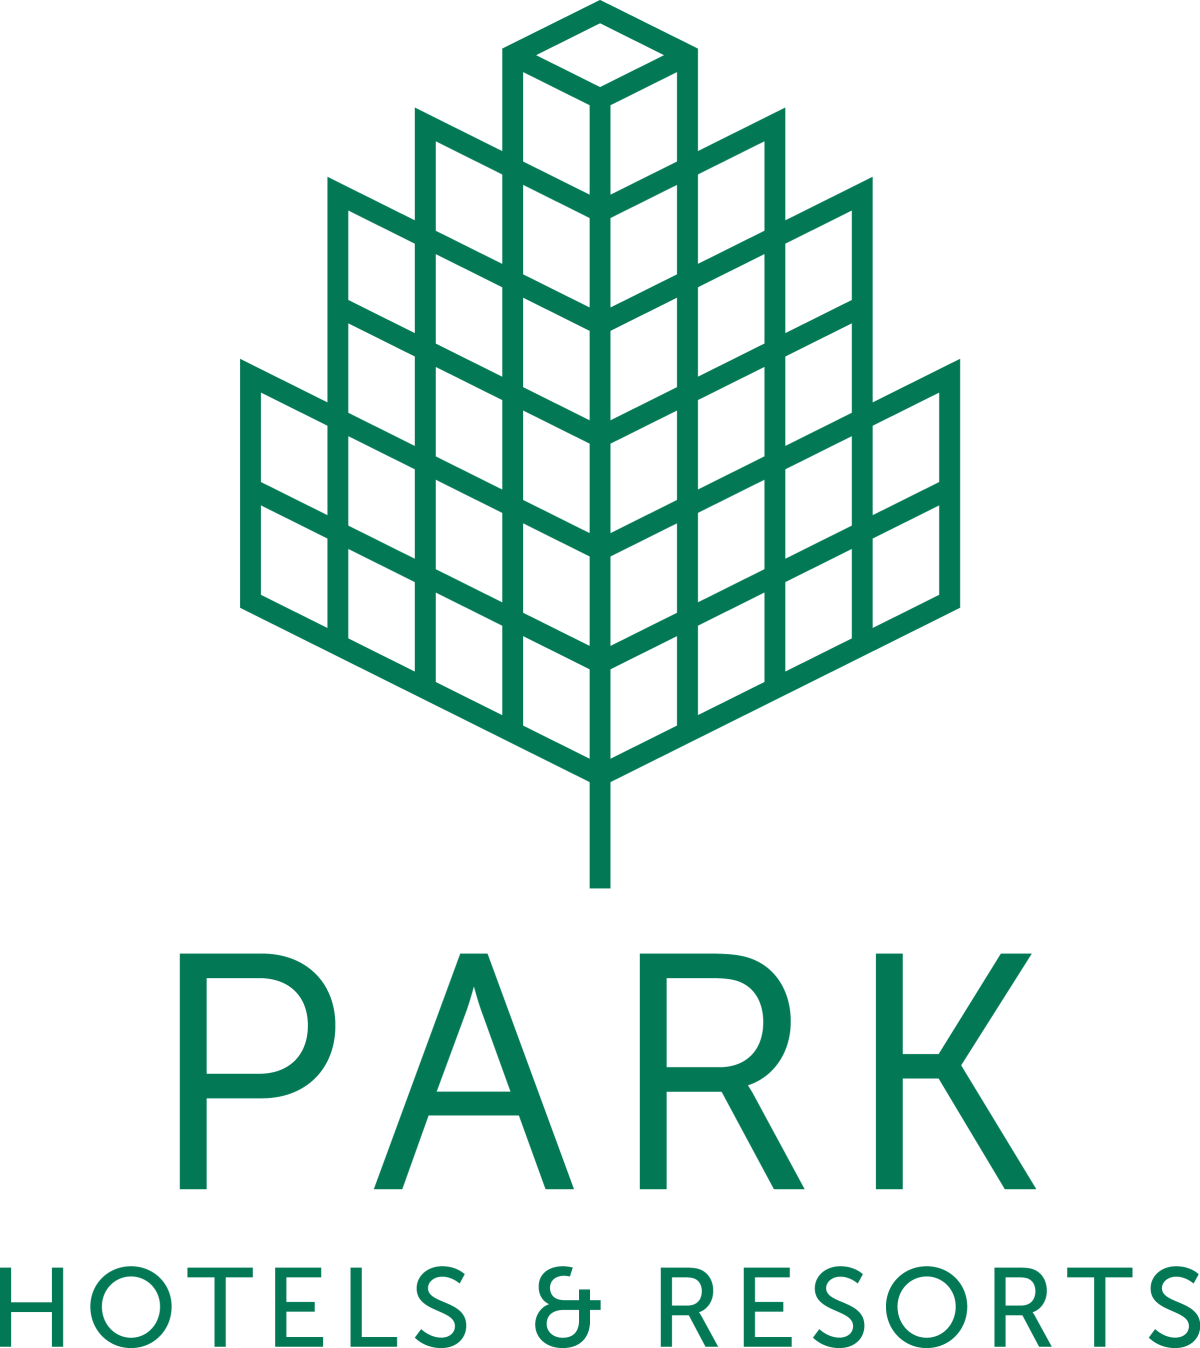 Park Hotels & Resorts Inc. Announces Tender Offer for Any and All of Its 7.500% Senior Notes Due 2025